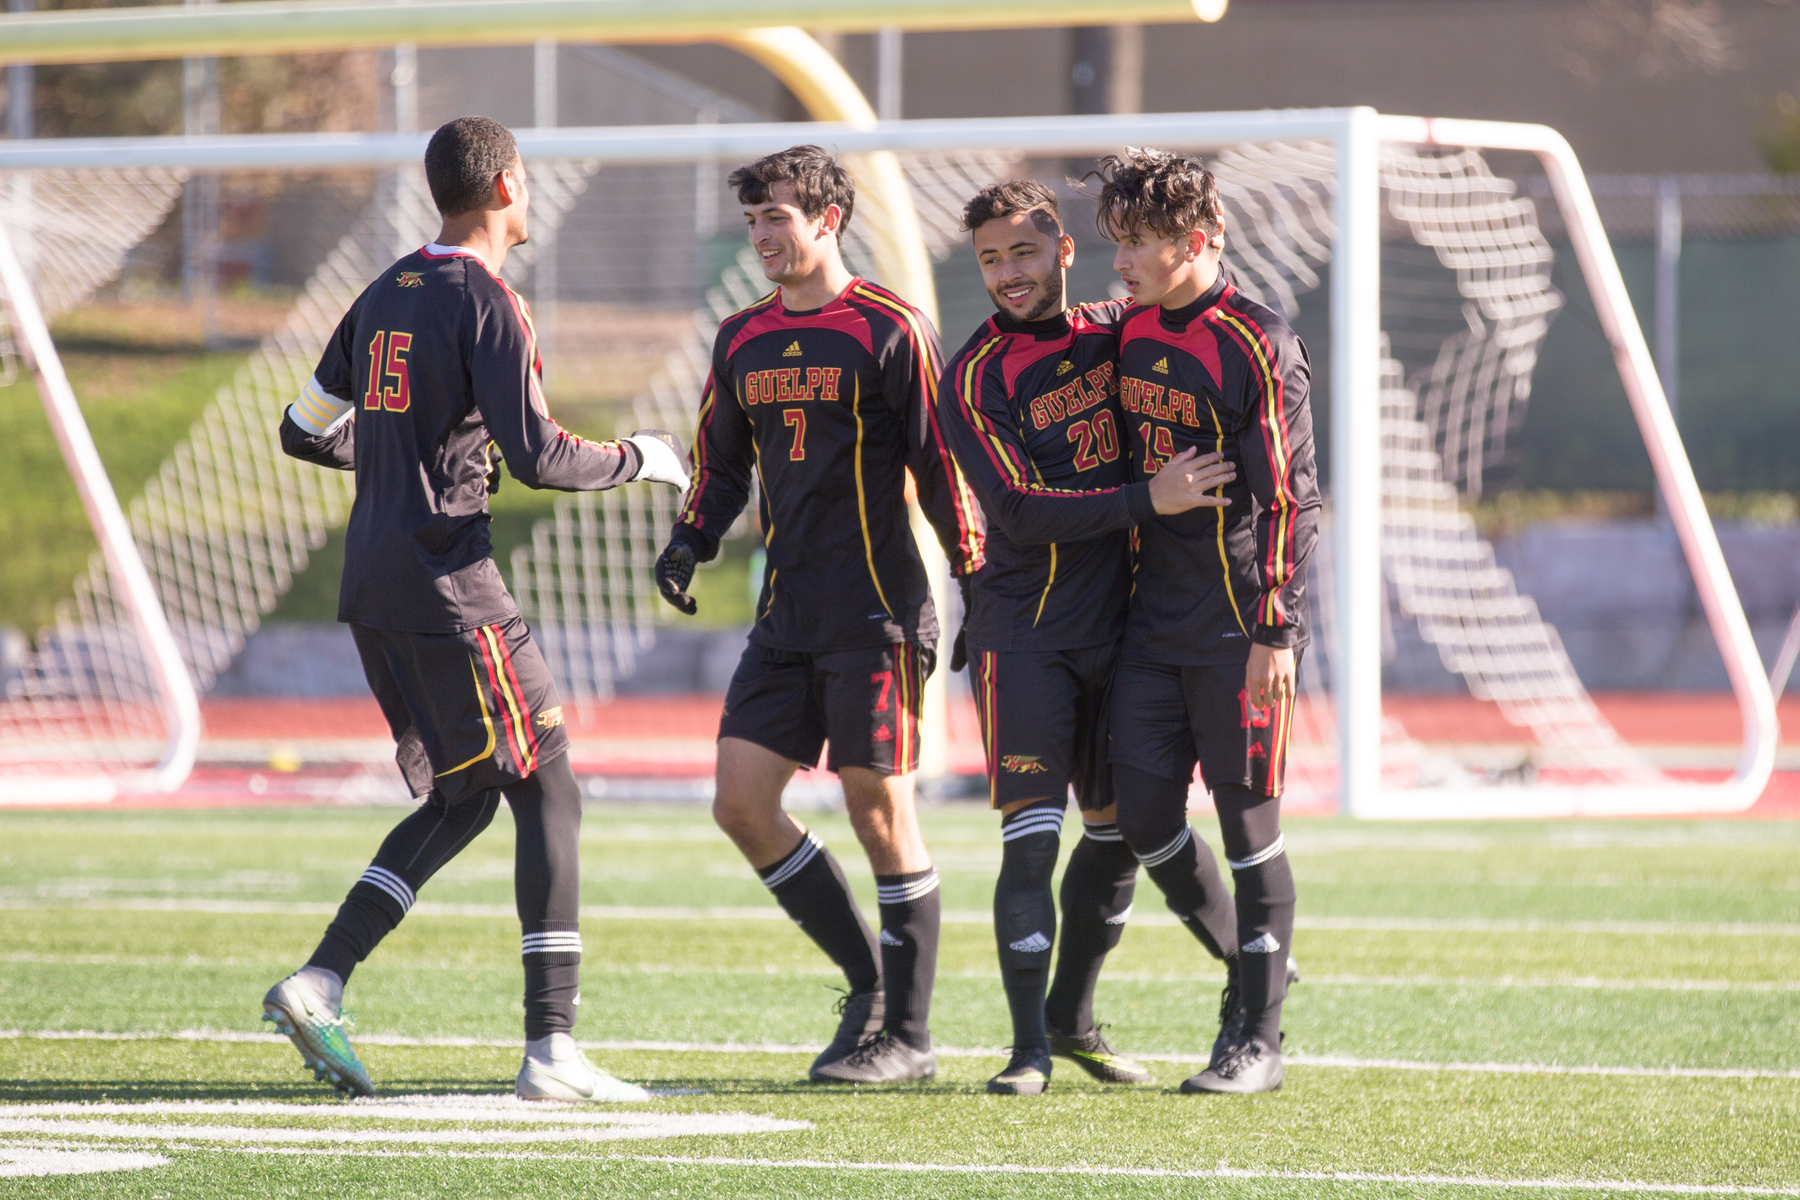 BRONZE 2016 men’s soccer championship: Gryphons take bronze in style with 3-0 win over Cape Breton